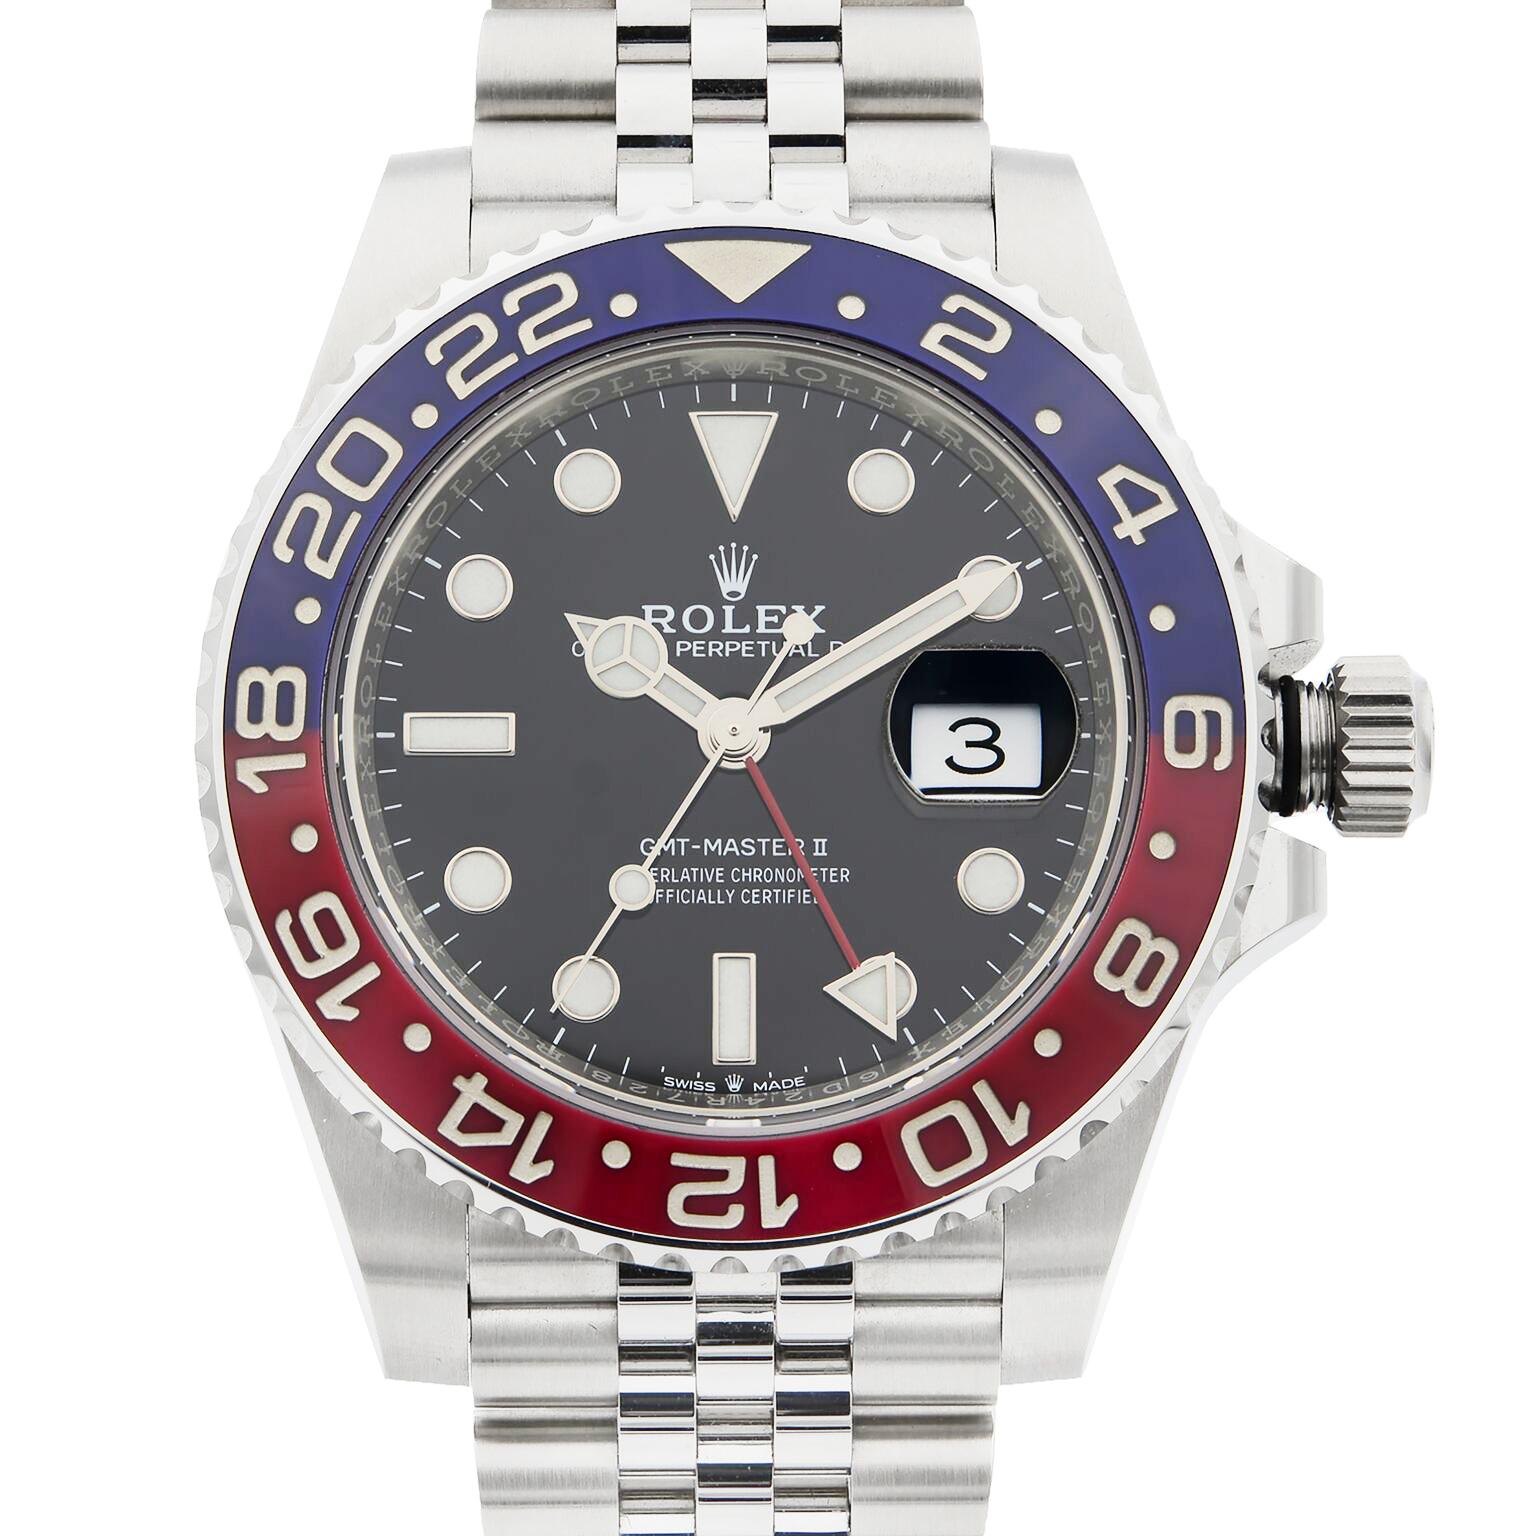 This display model Rolex GMT-Master II 126710BLRO is a beautiful men's timepiece that is powered by an automatic movement which is cased in a stainless steel case. It has a round shape face, date dial and has hand sticks & dots style markers. It is